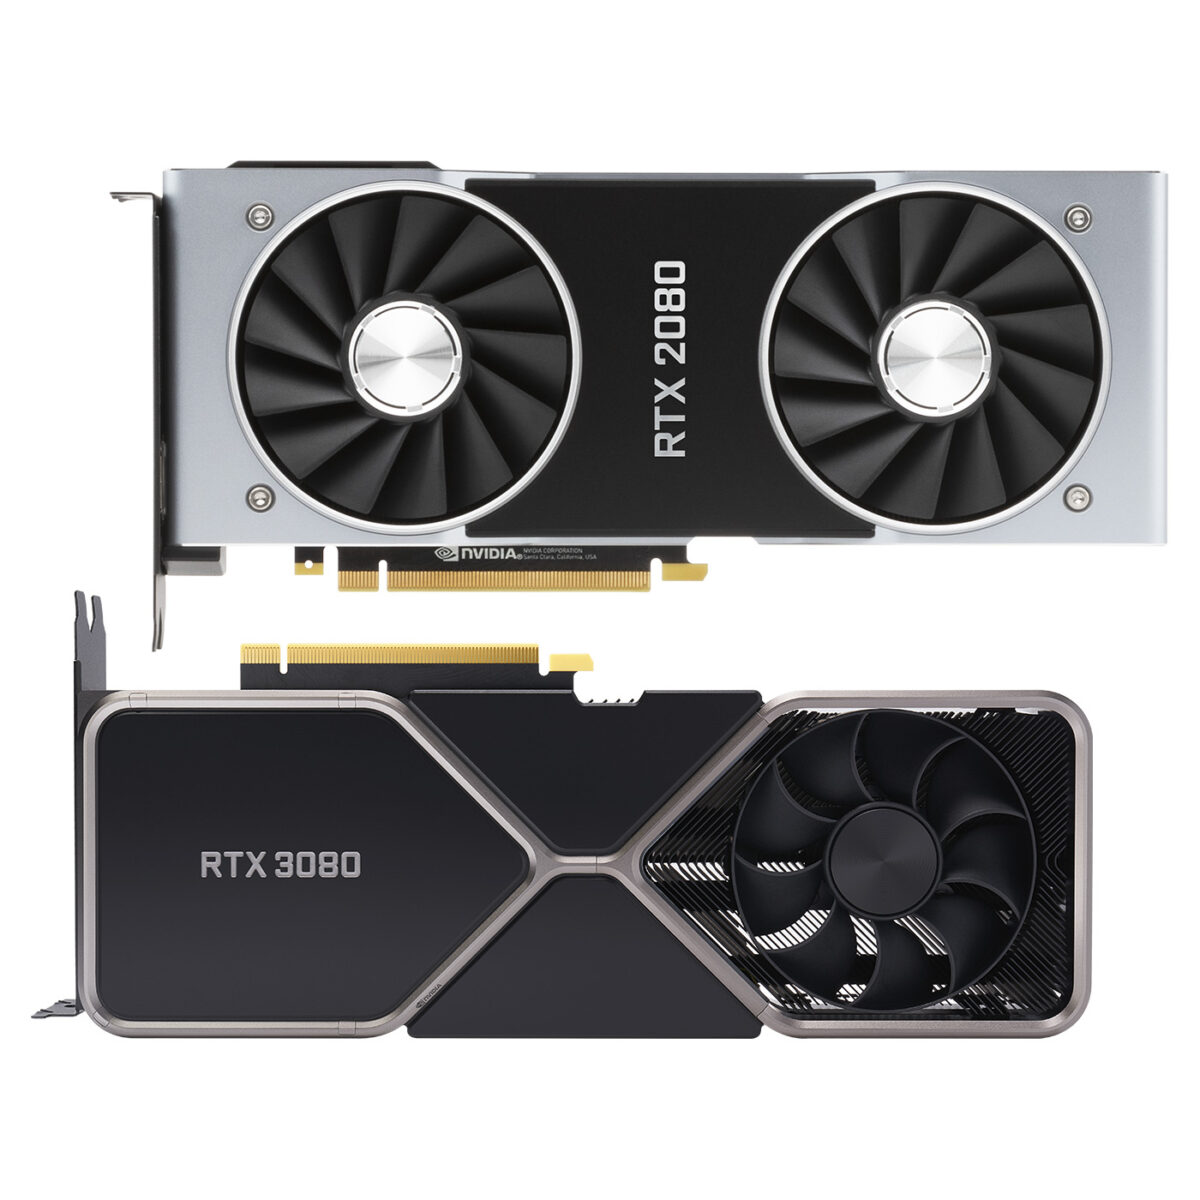 How Does Dual GPU Rendering Scale With NVIDIA's RTX 3080 & Your Old GPU? –  Techgage